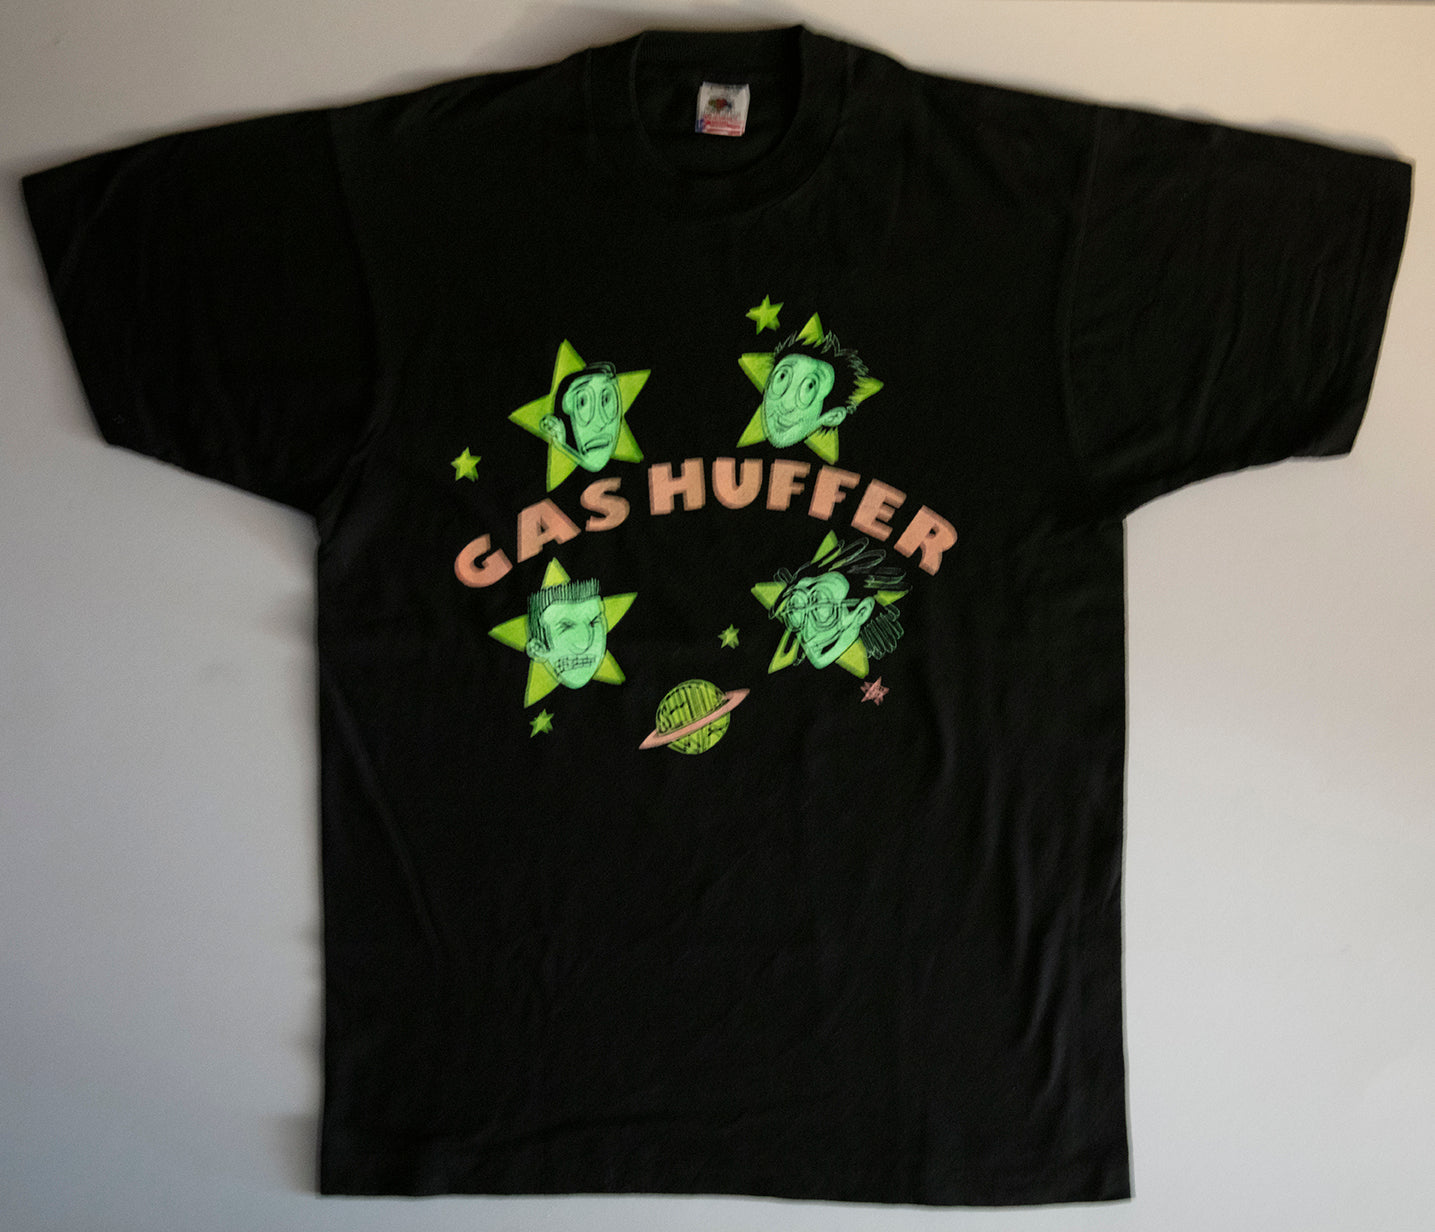 Gas Huffer - Janitors Of Tomorrow 1991 Tour Shirt Size Large (Glow In The Dark)